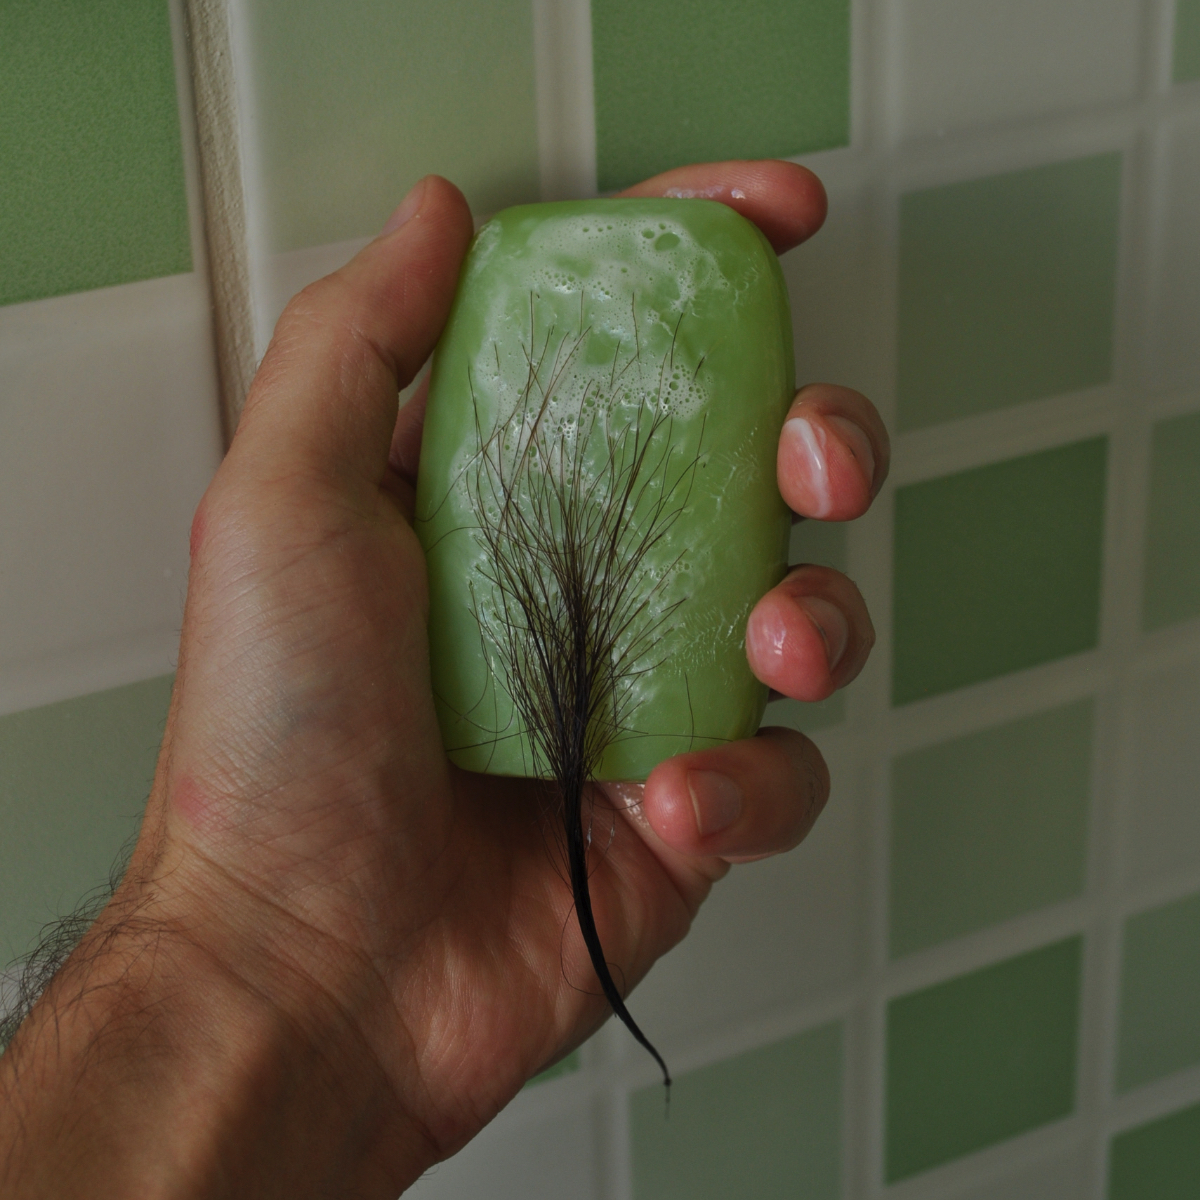 Matteo Ingrao, sculpture, art - Photo of human hand holding up green bar of soap, soap is covered in black hair.